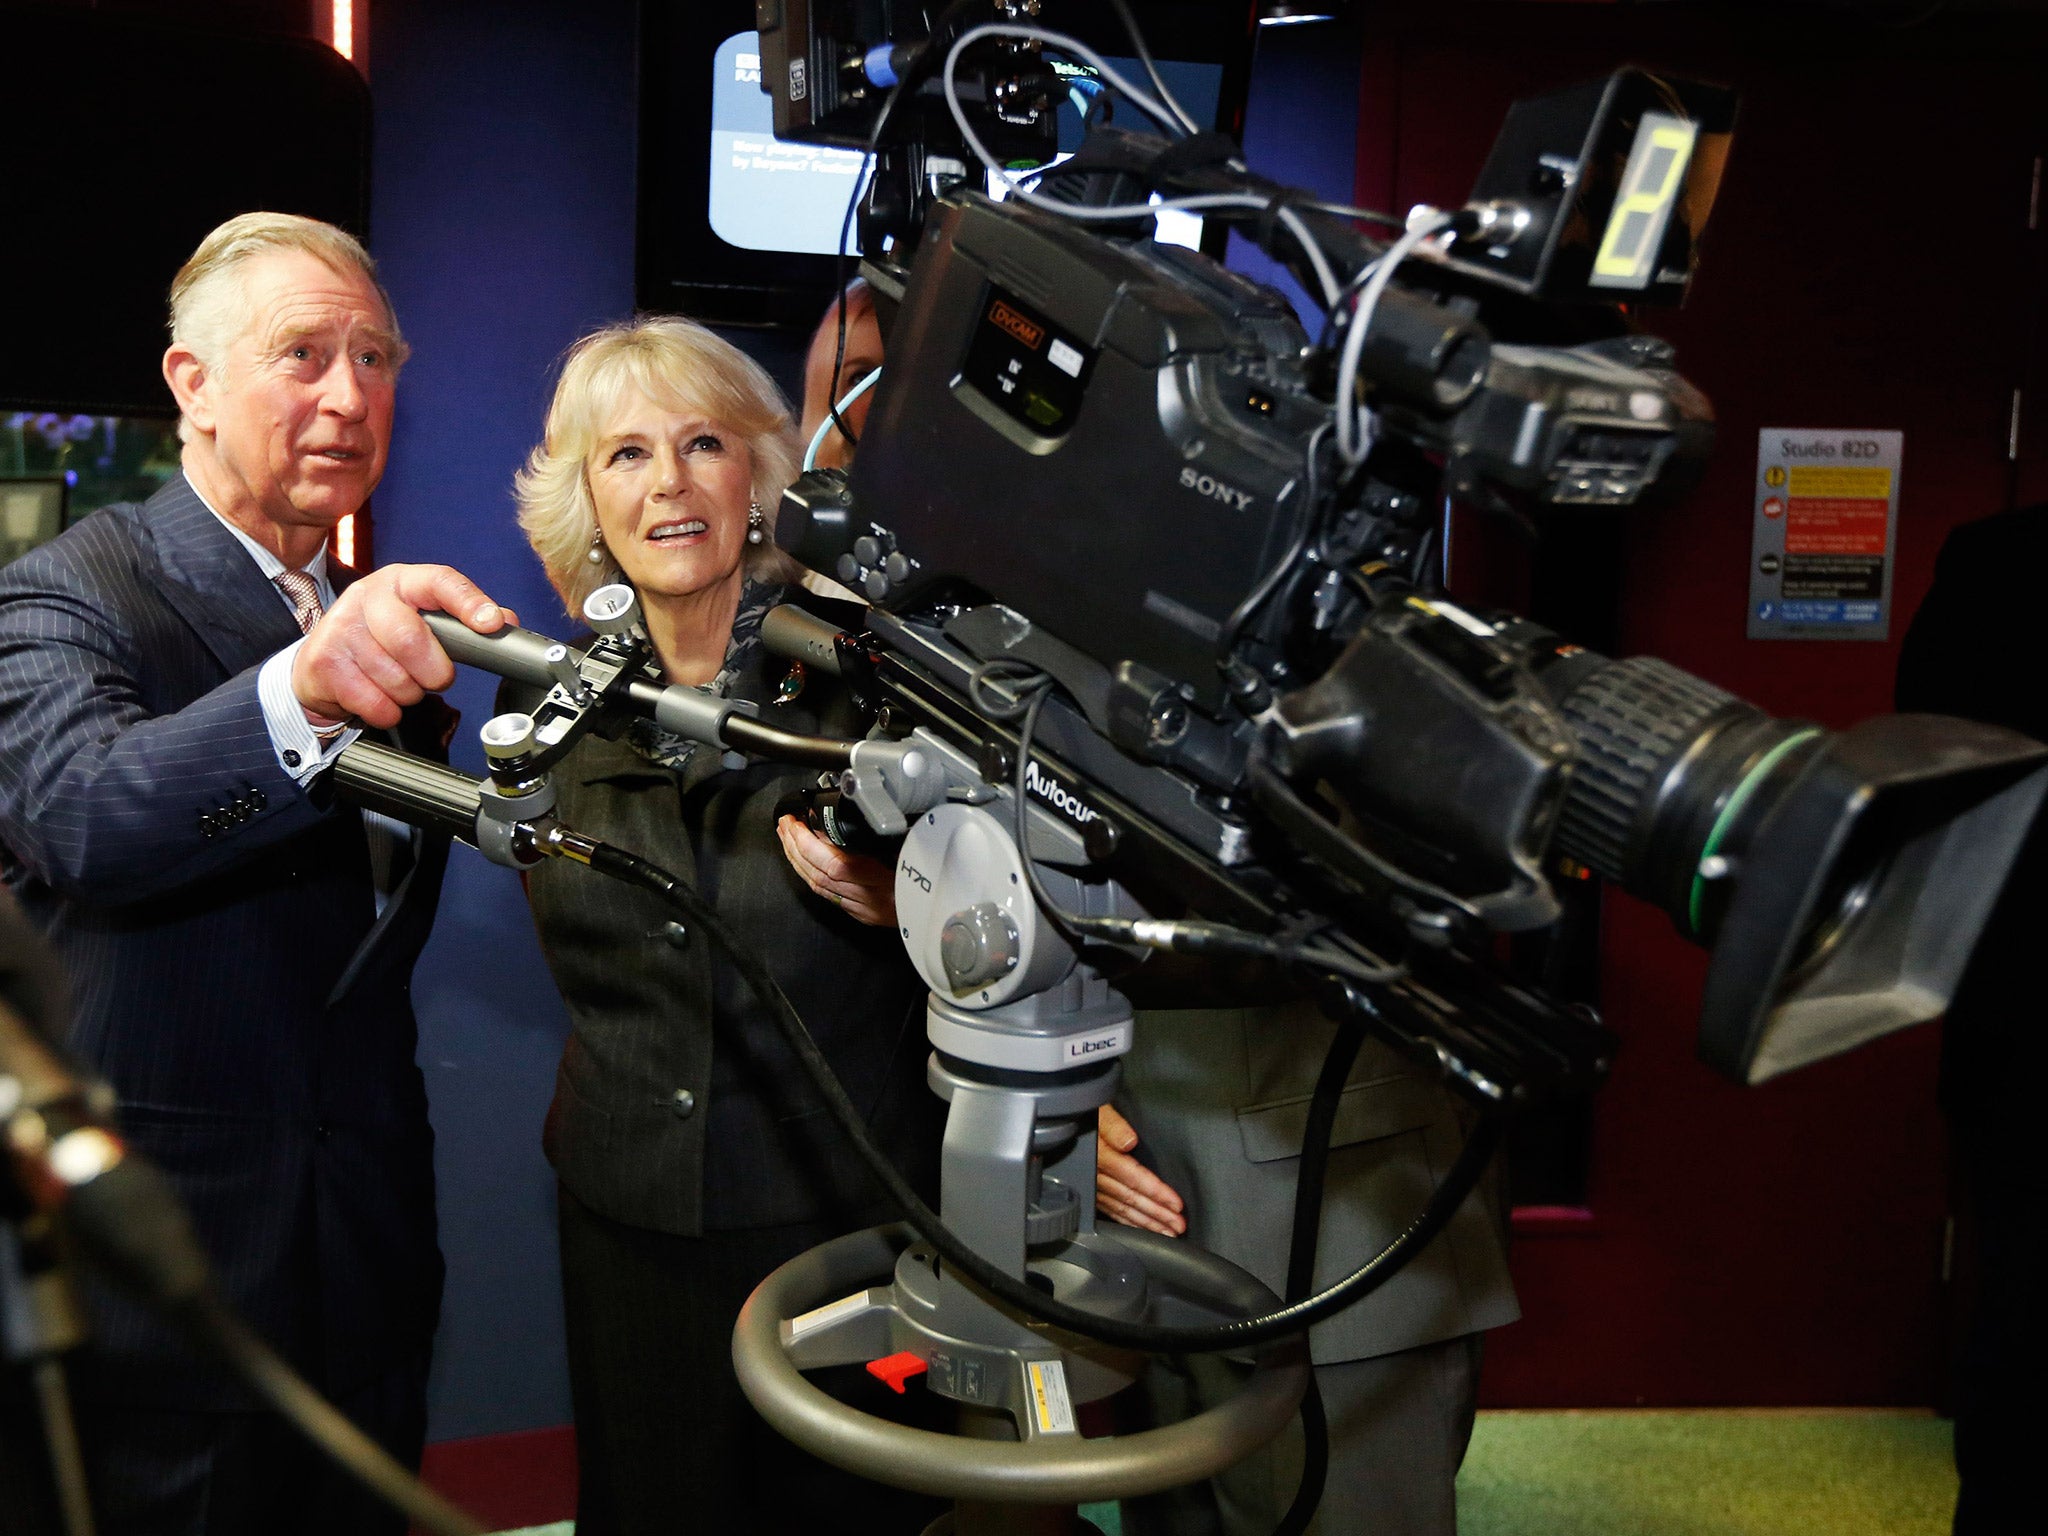 Prince Charles and Camilla during a visit to the BBC last year (Getty)